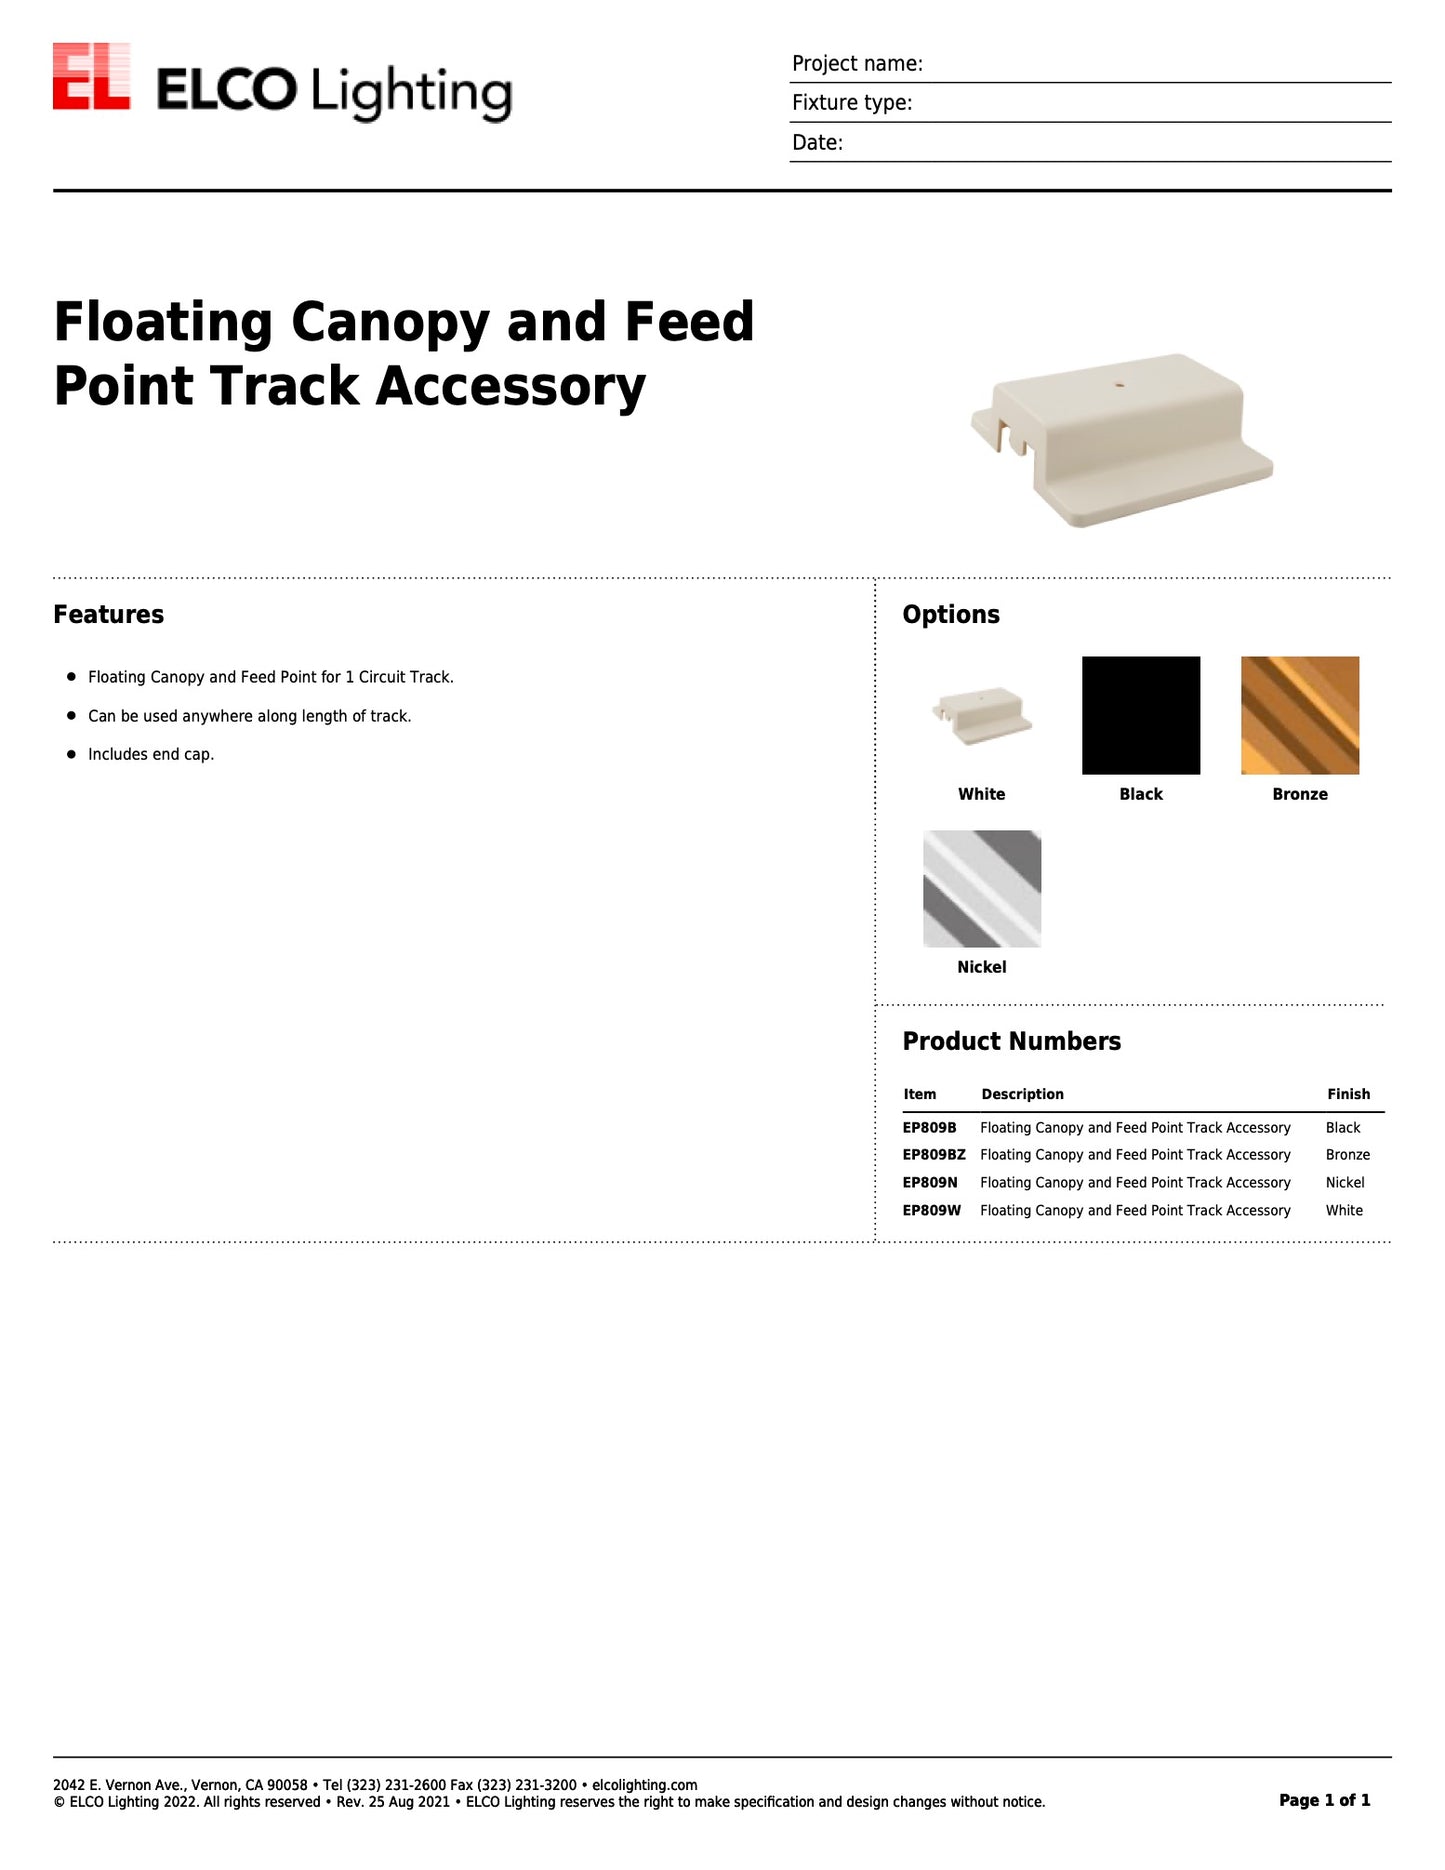 Floating Canopy and Feed Point Track Accessory